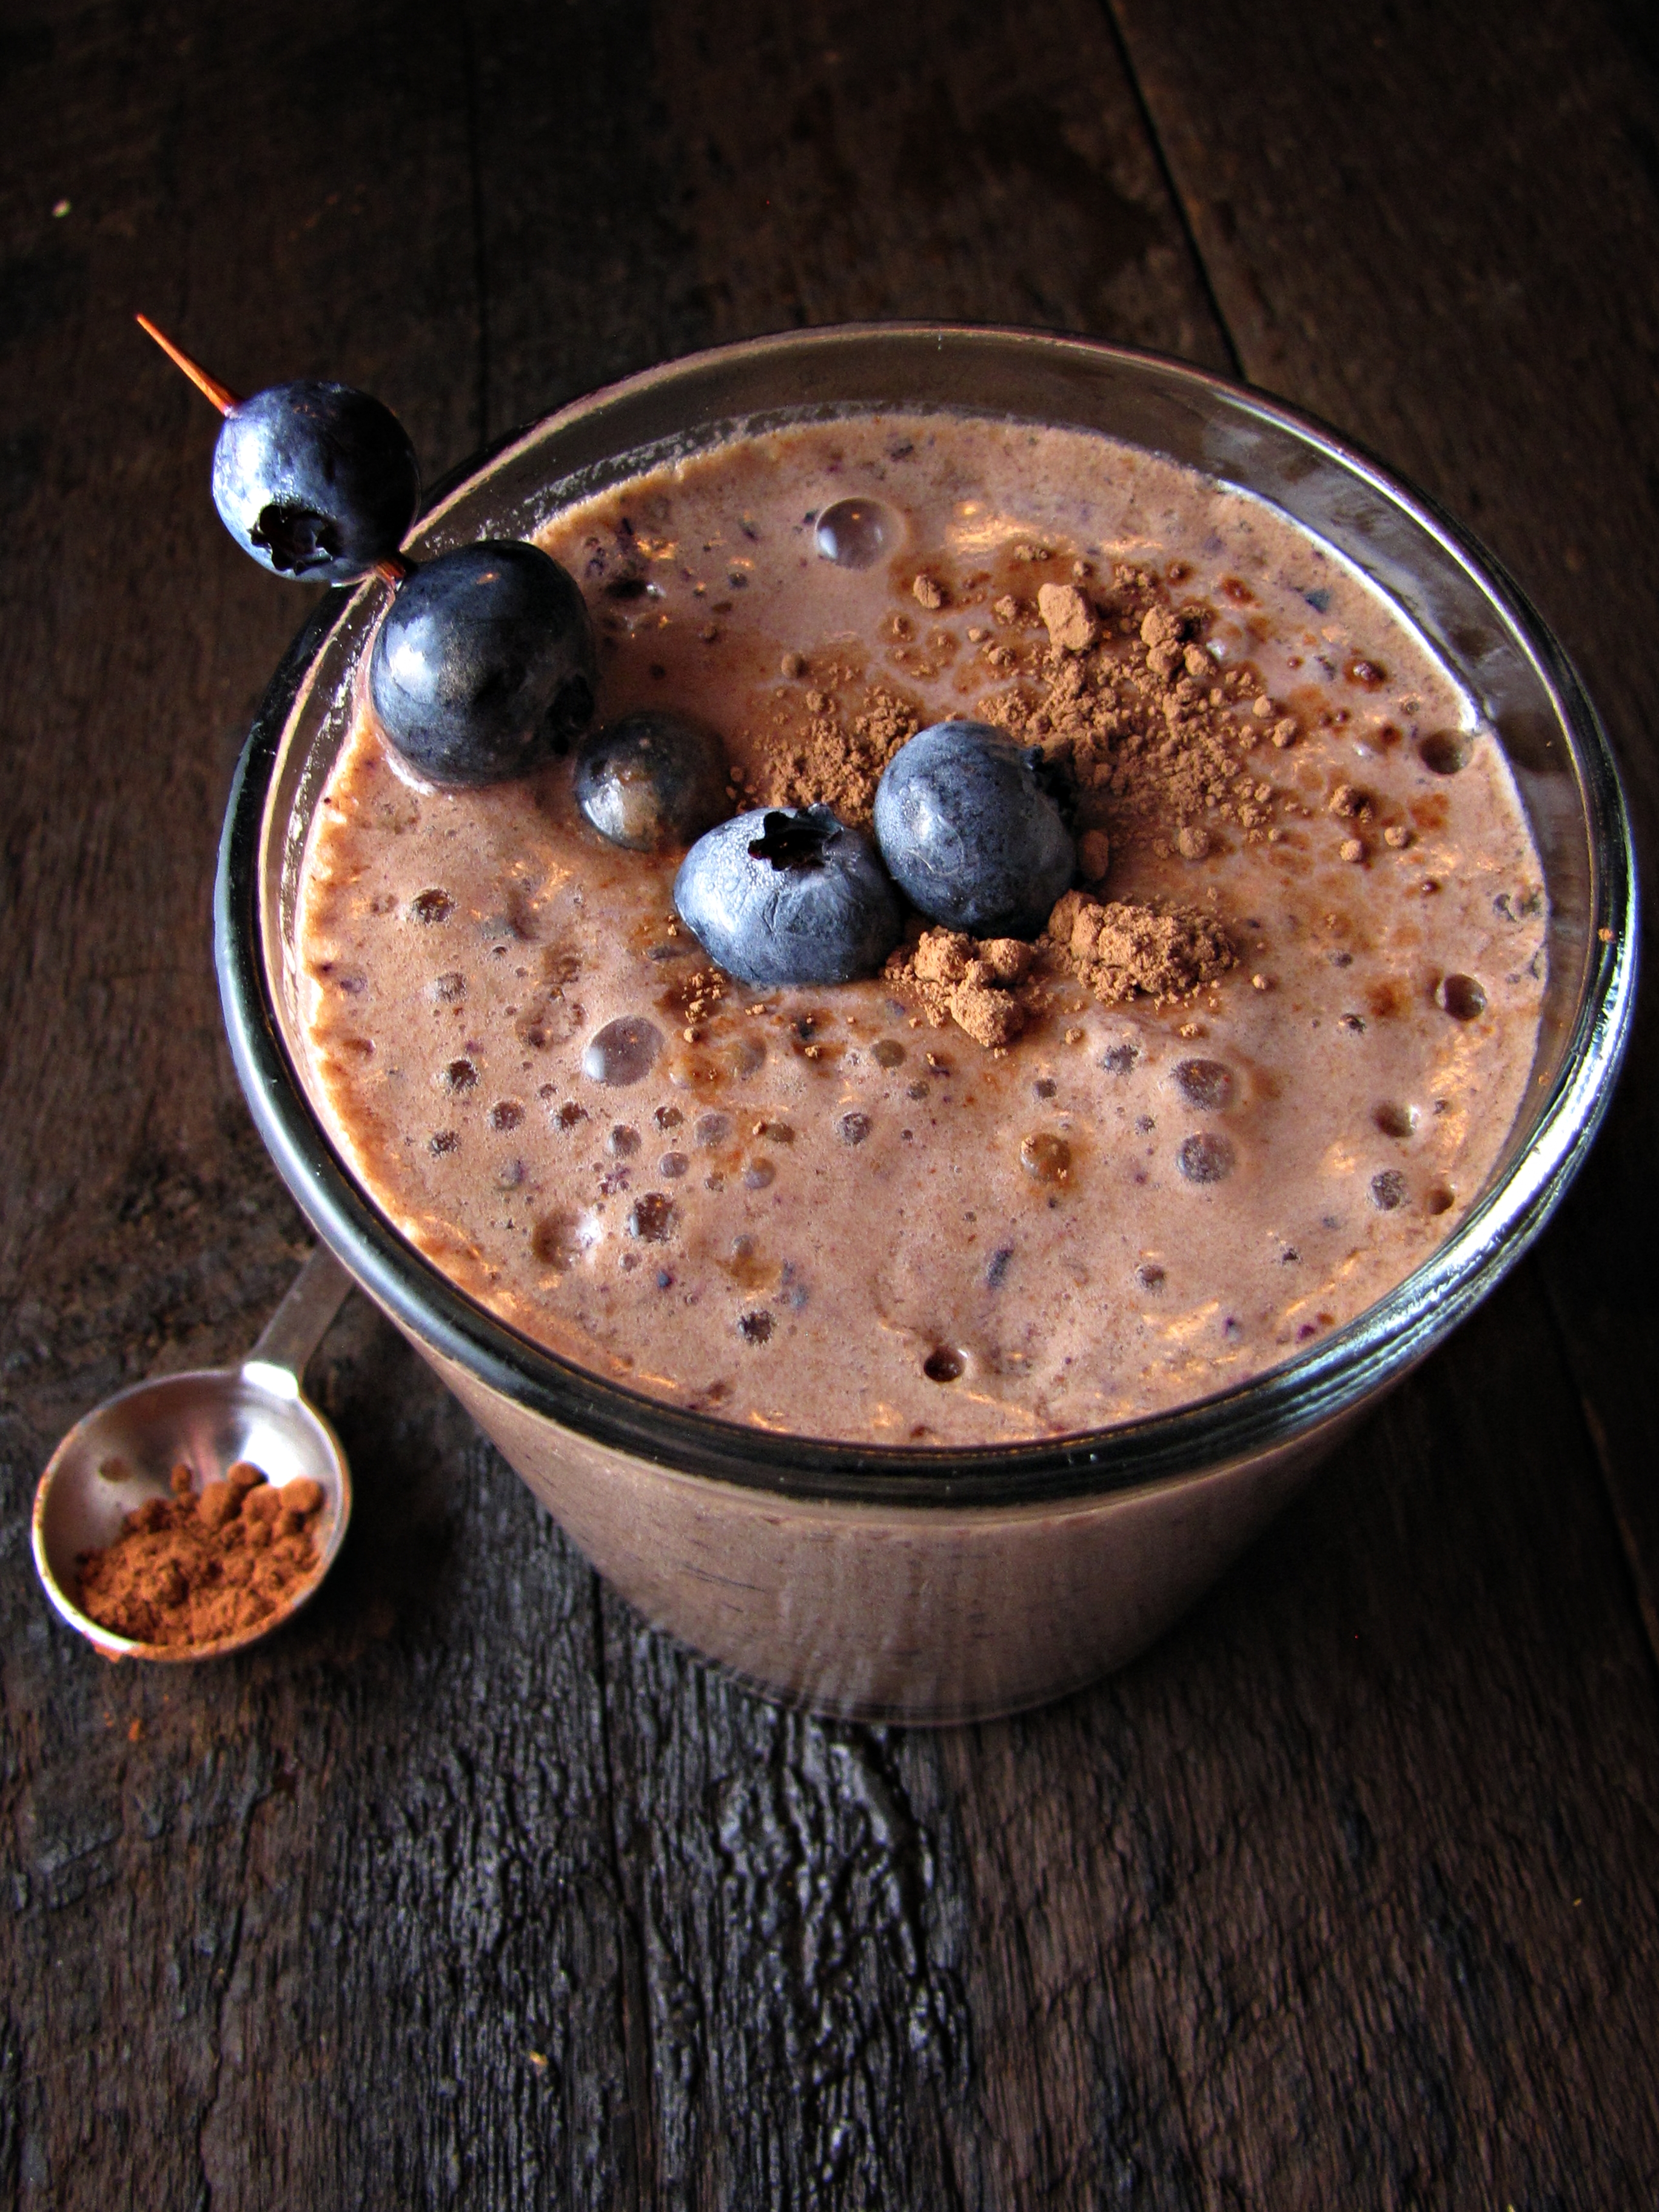 Greatist Collaboration: Chocolate Blueberry “Decadence” Smoothie